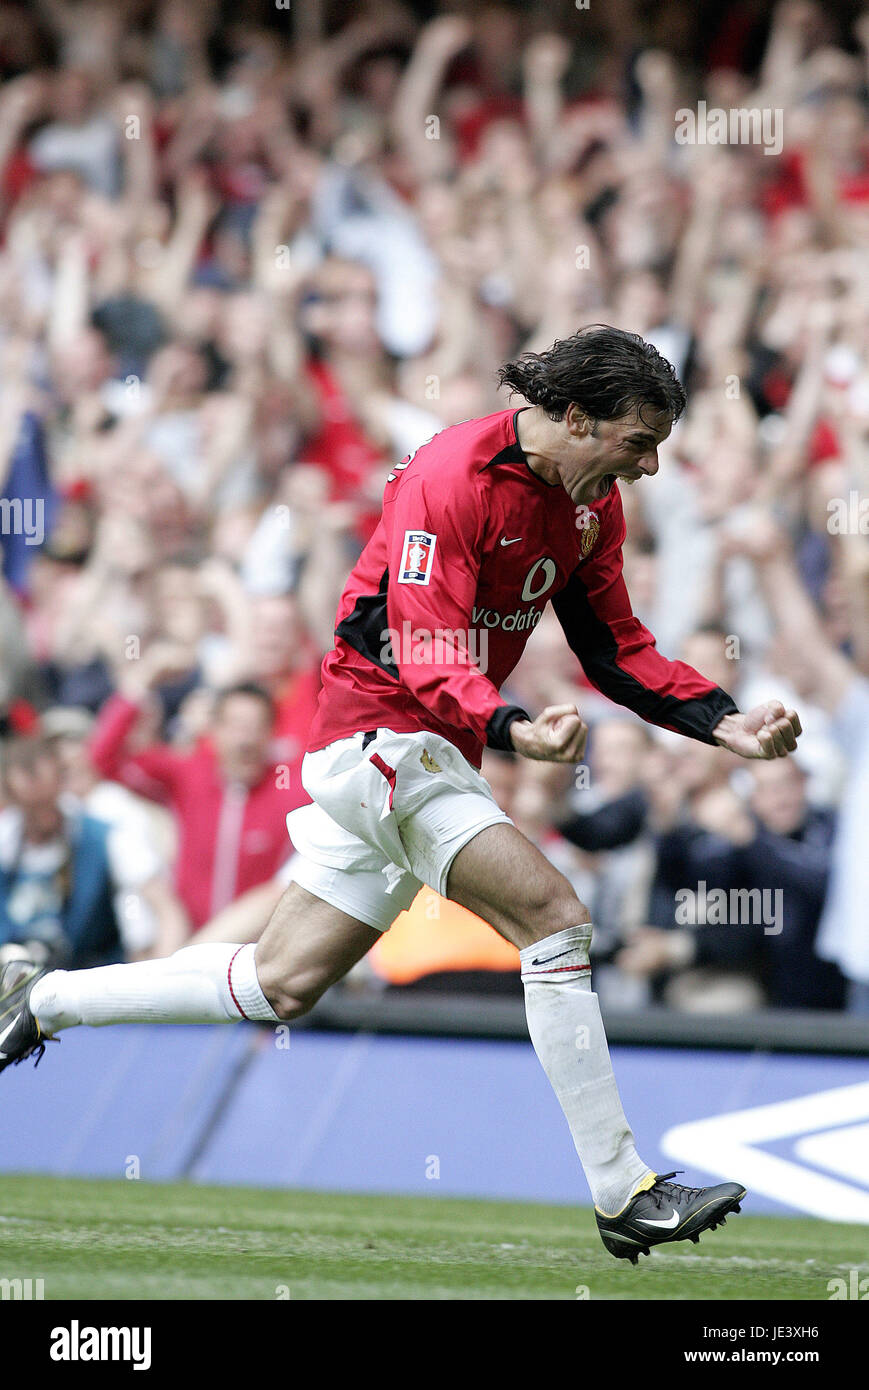 RUUD VAN NISTELROOY MANCHESTER UNITED FC MILLENIUM STADIUM CARDIFF WALES 22 May 2004 Stock Photo